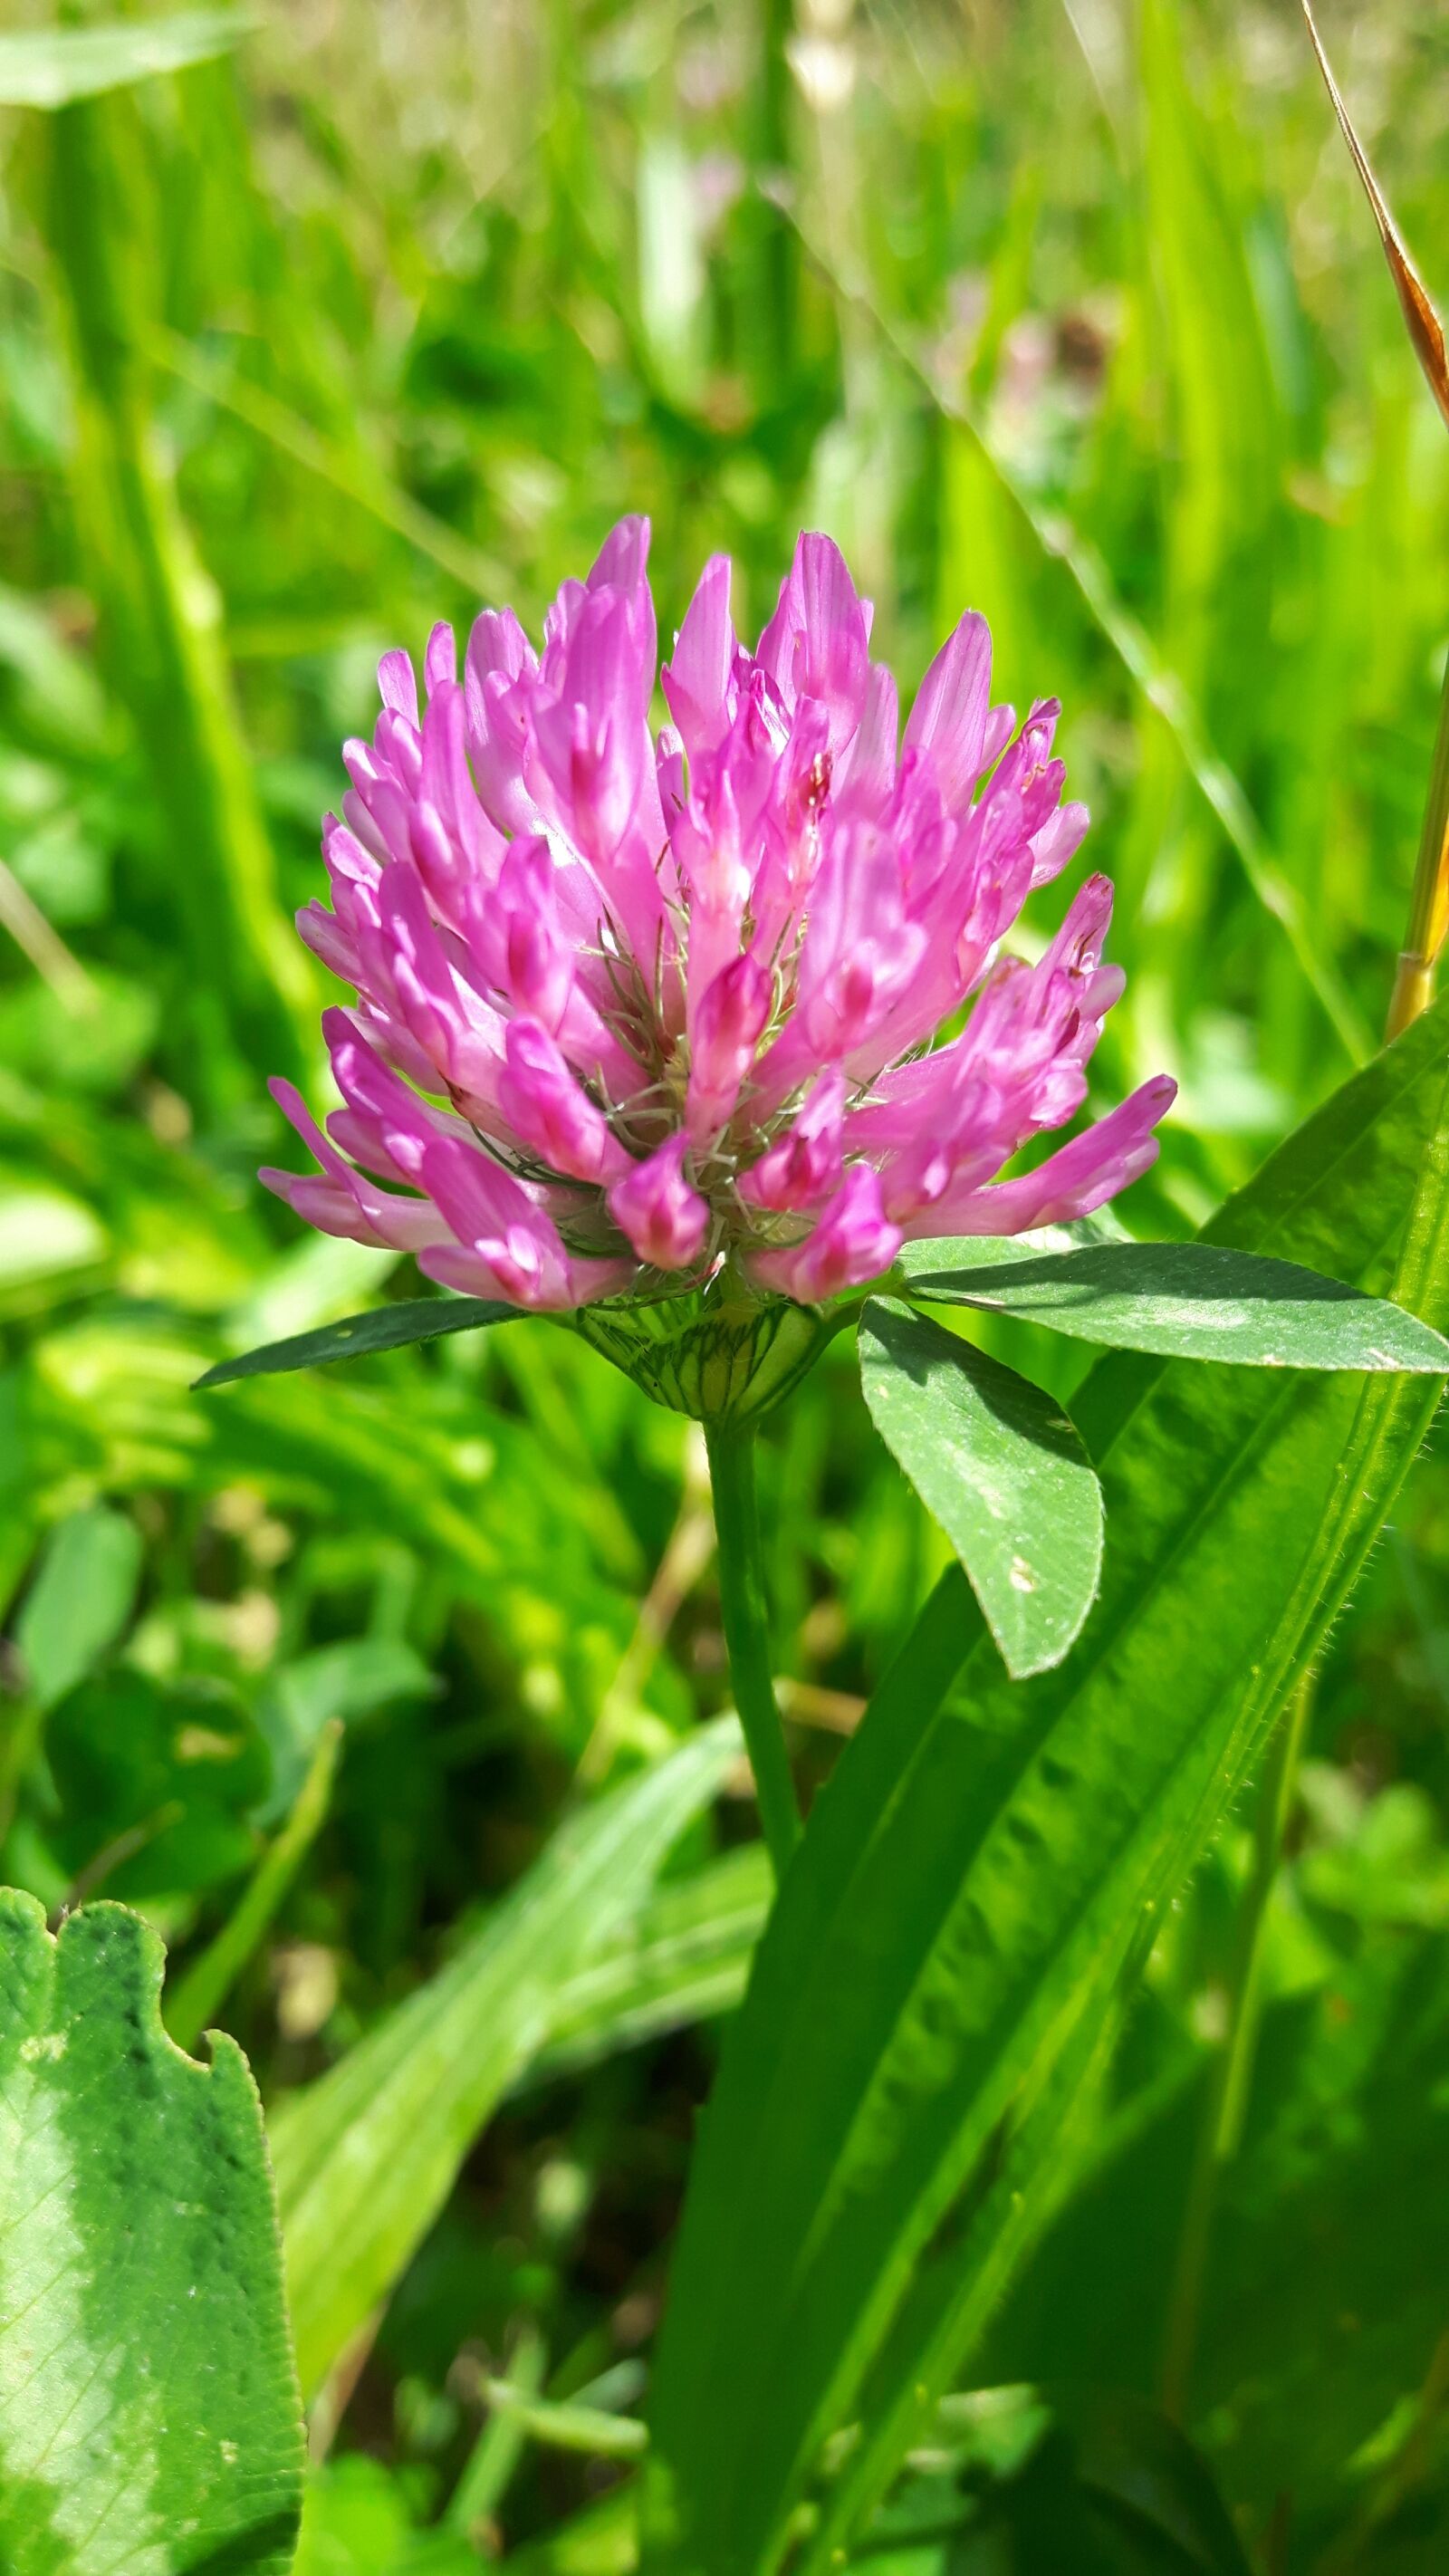 Samsung Galaxy S5 Neo sample photo. Flower, clover, nature photography